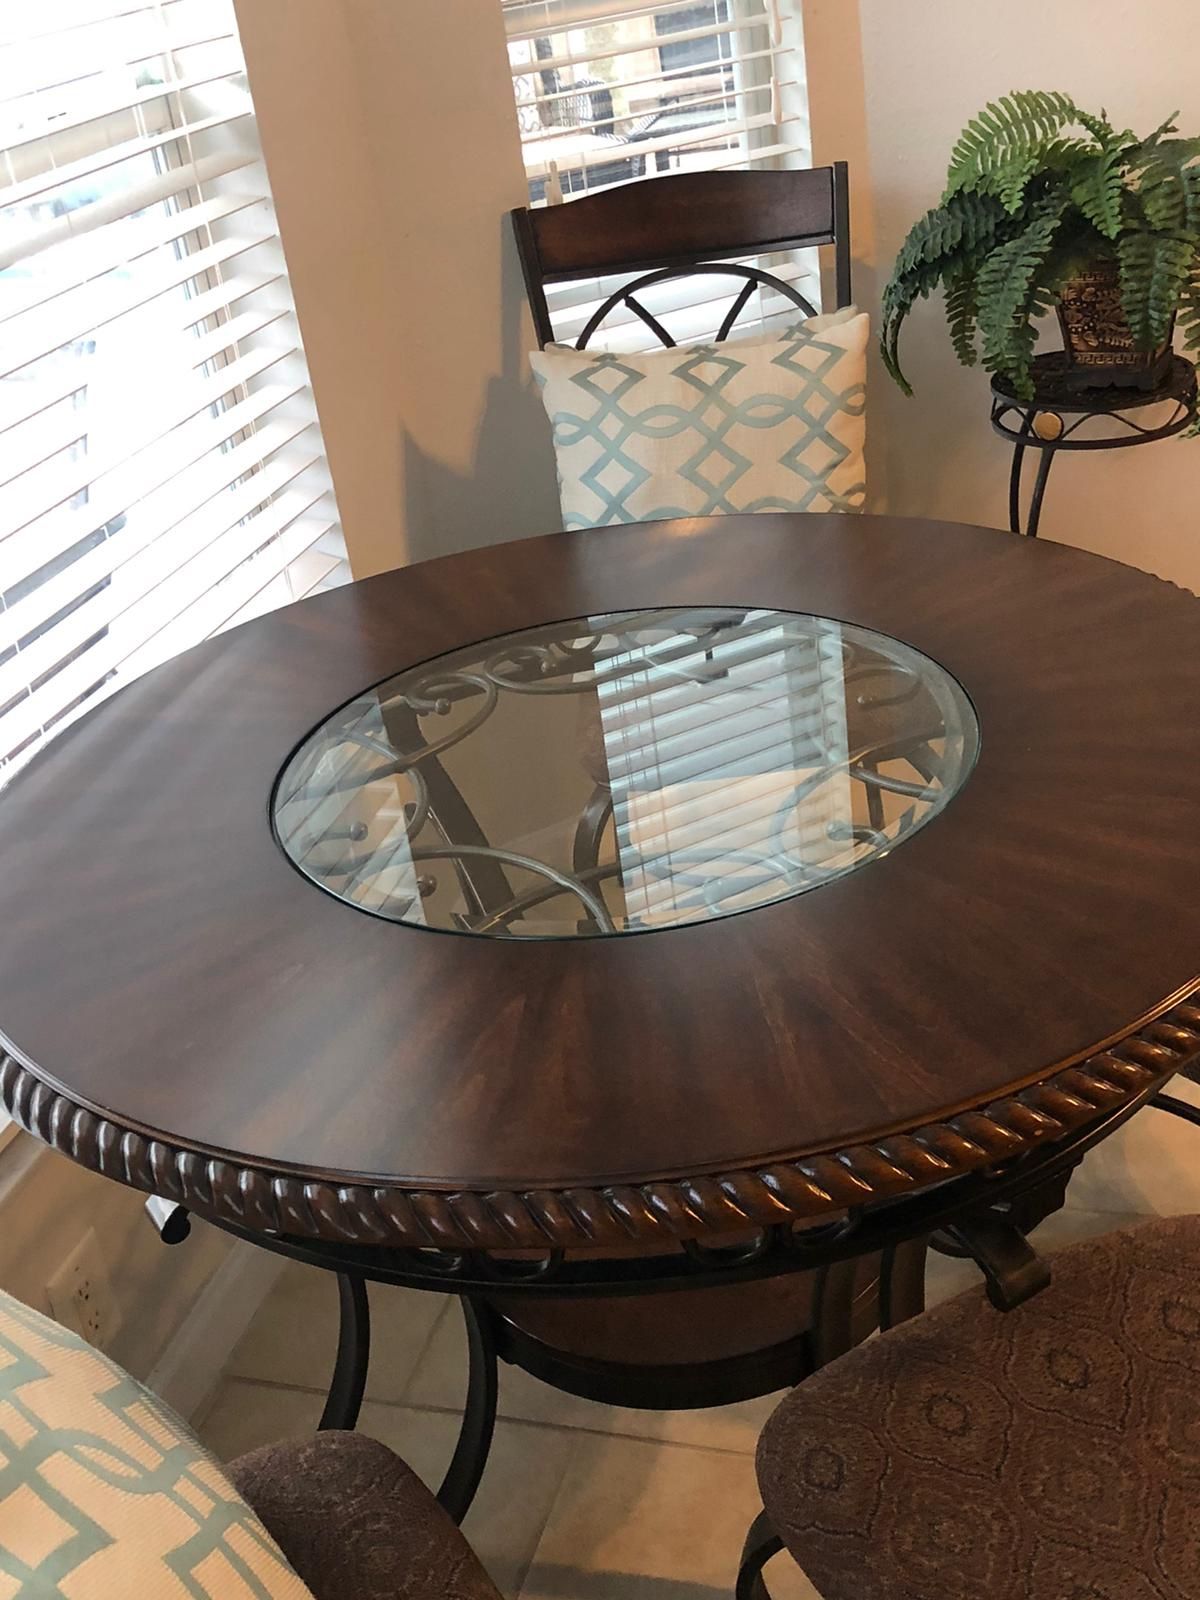 Solid, strong and reliable Kitchen Table w/ 4 chairs